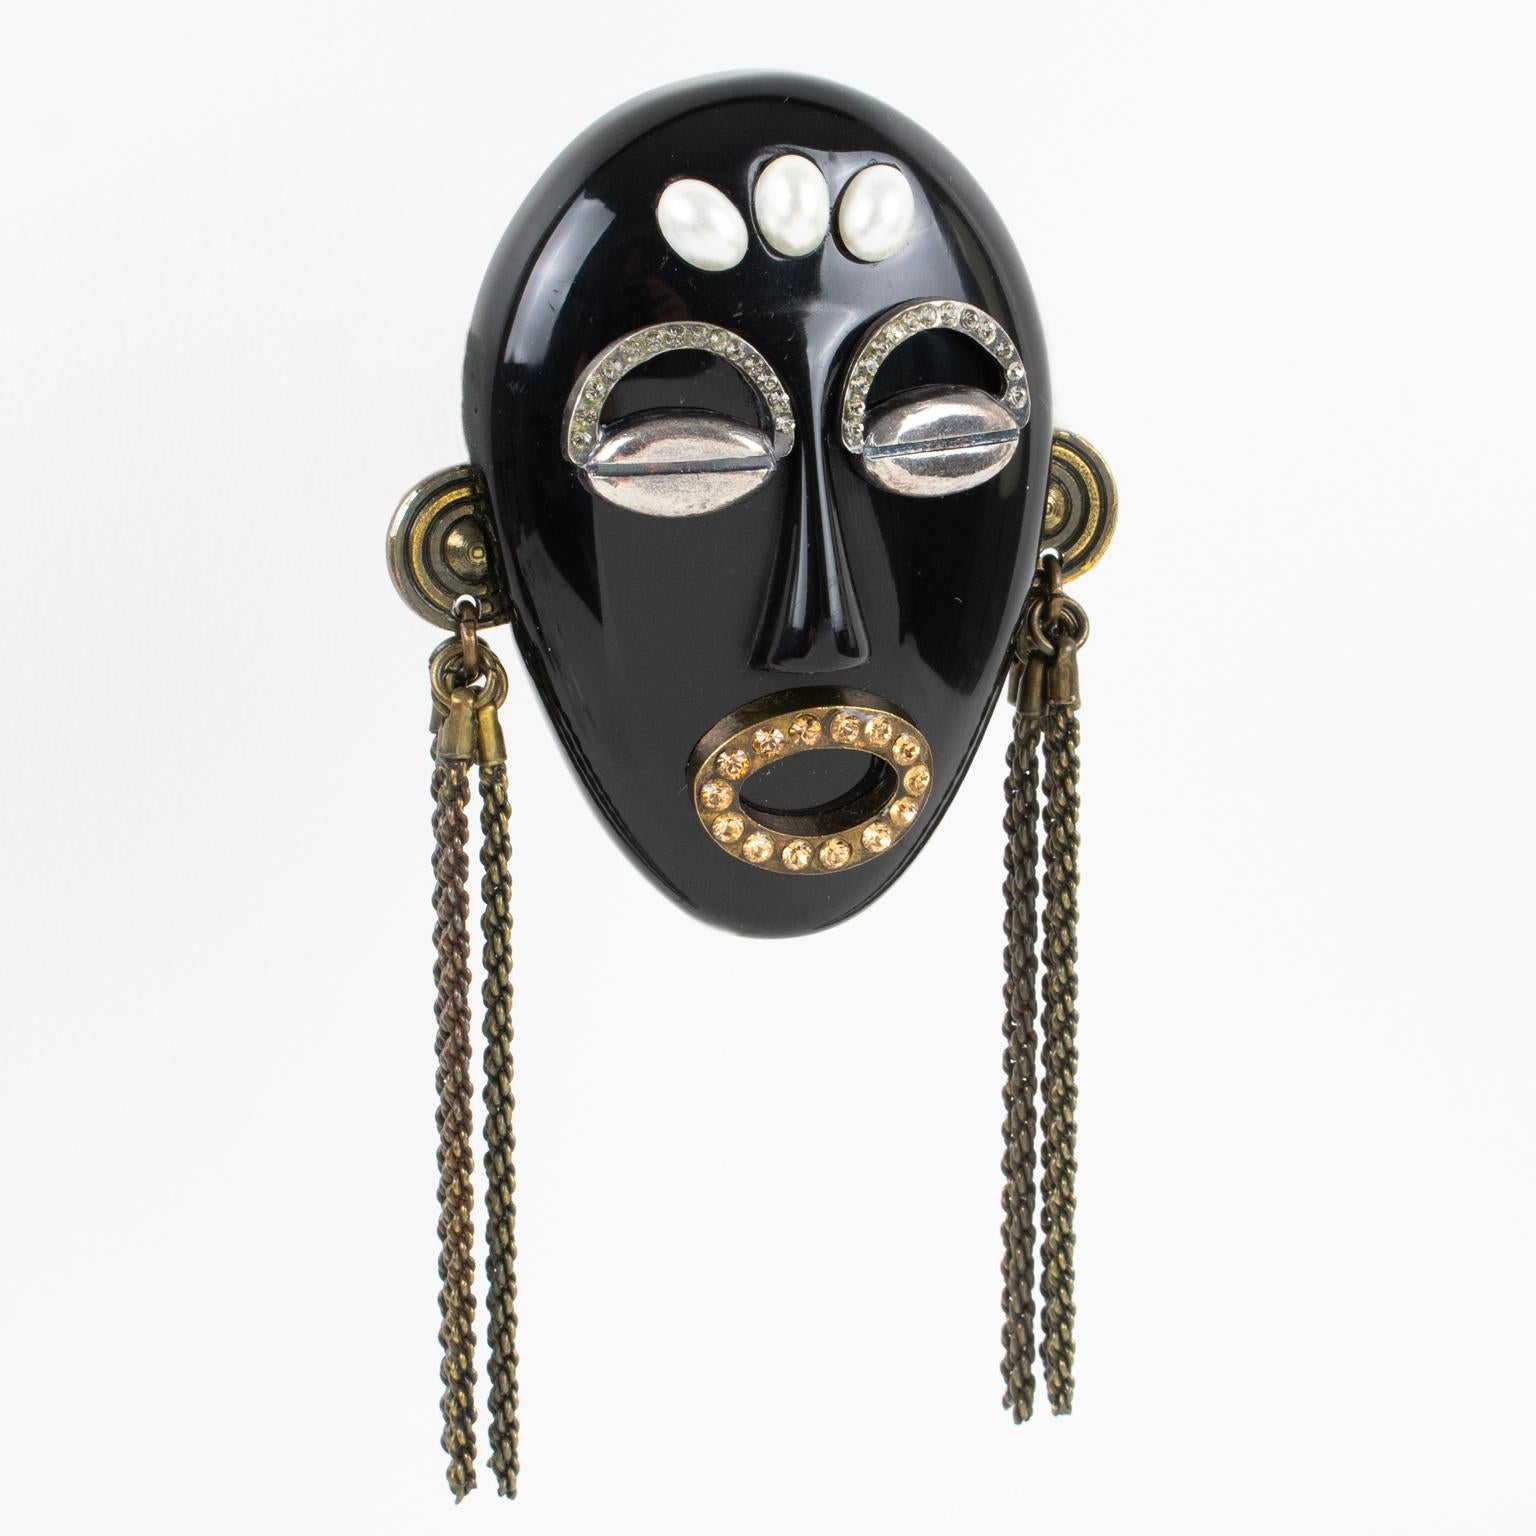 Missoni Italy 1991 Black Resin and Metal Tribal Mask Pin Brooch For Sale 3